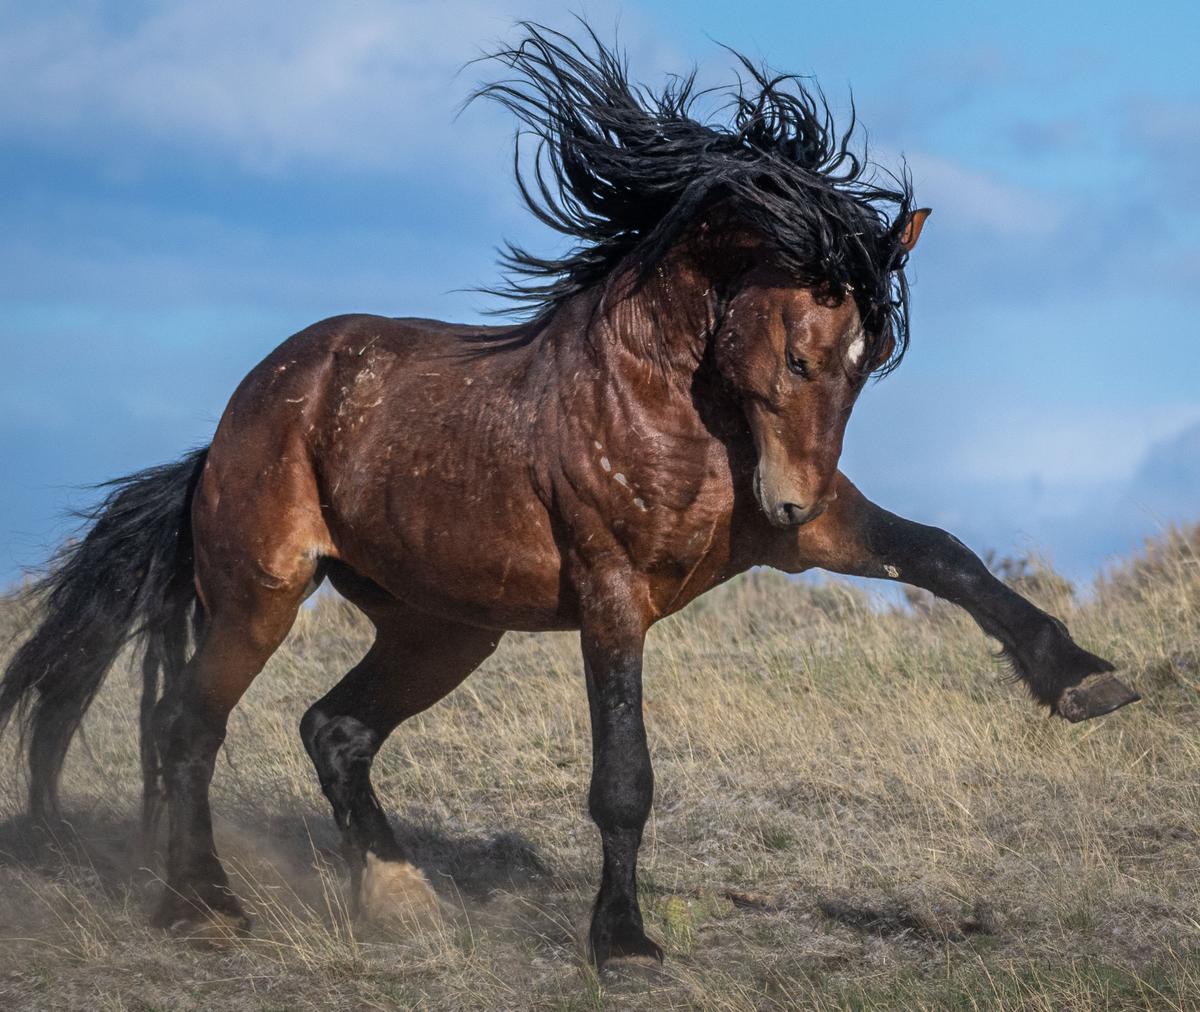 A beautiful McCullough Peaks stallion lets his displeasure be known through his powerful posturing. This HMA (Herd Management Area) is near Cody, Wyoming. (Courtesy of <a href="https://www.instagram.com/swgoudge/">Susan Goudge</a>)